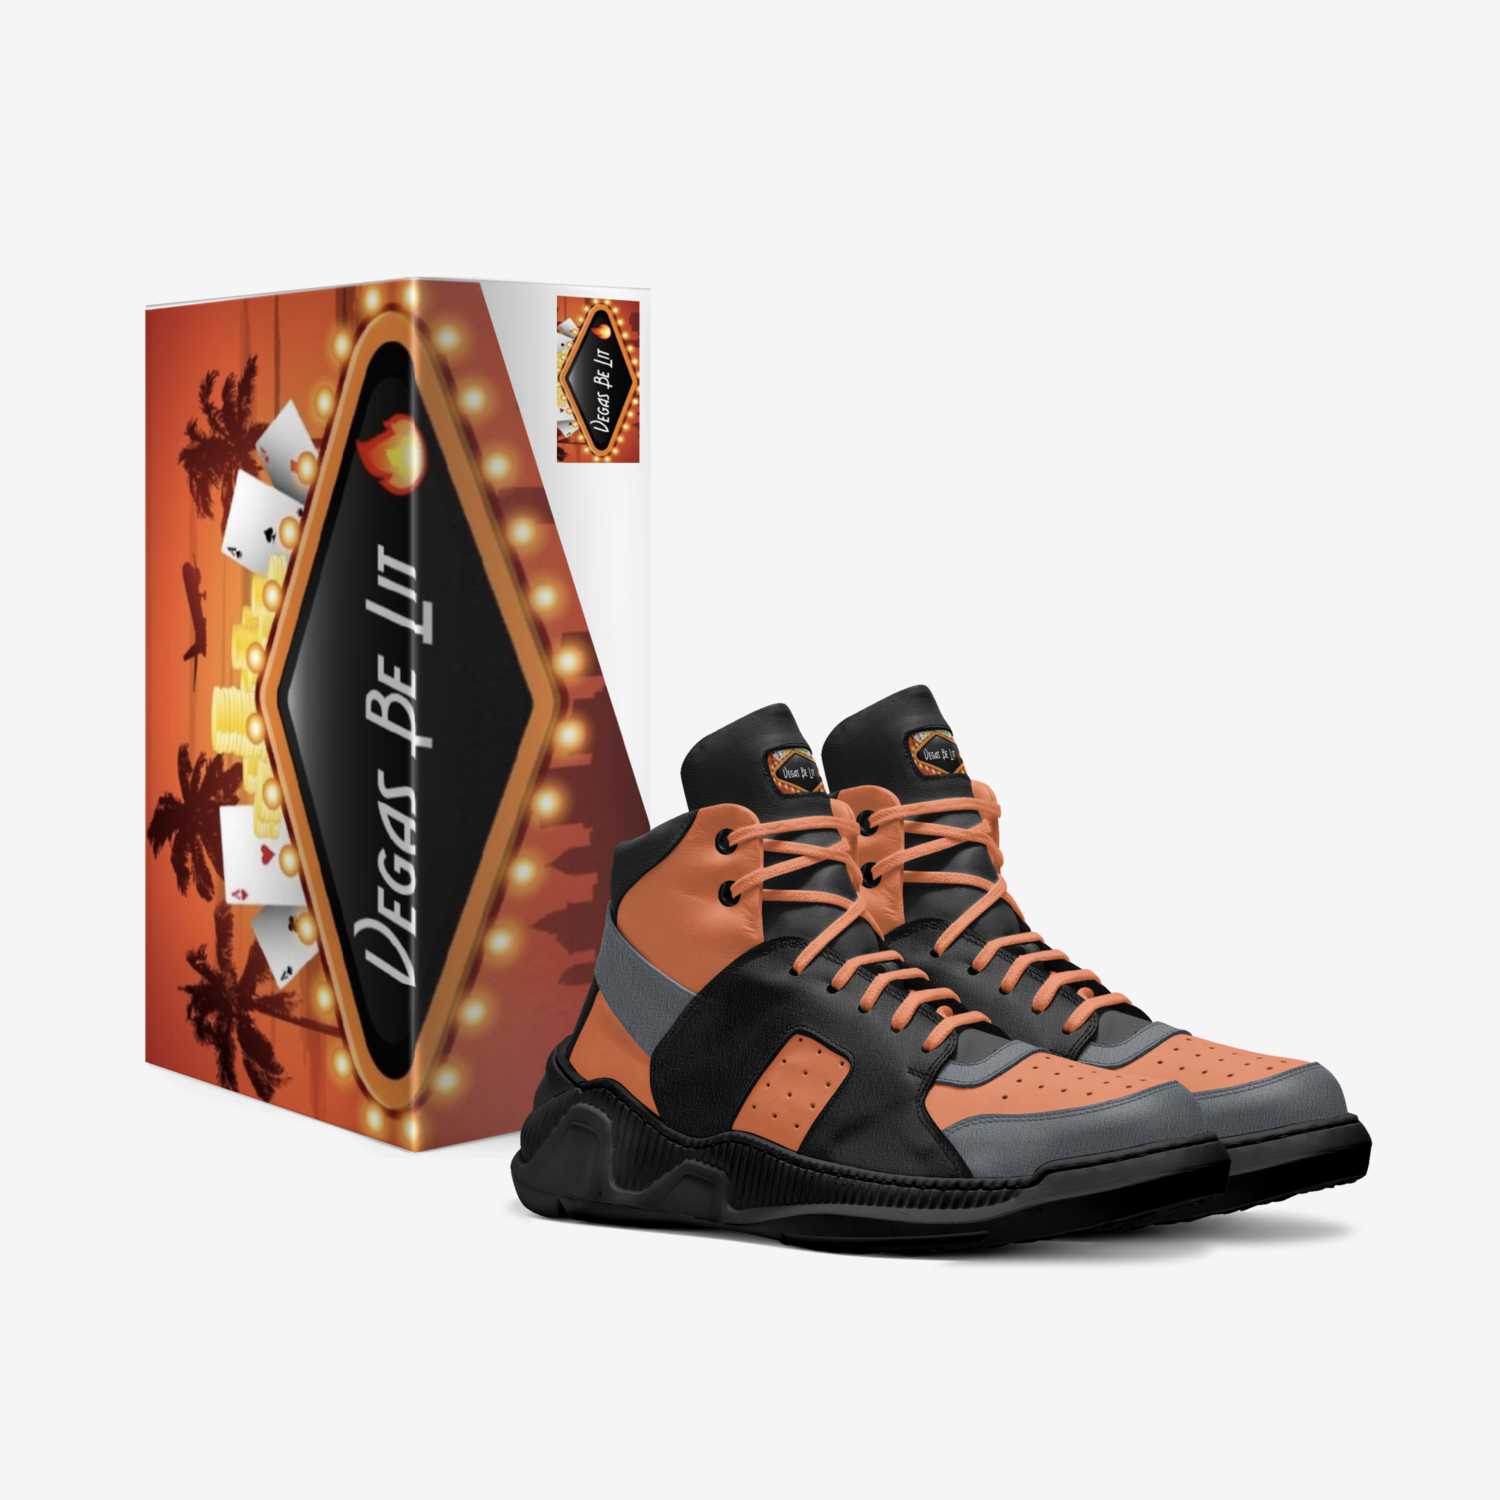 Vegas Elites custom made in Italy shoes by Joshua Lee | Box view